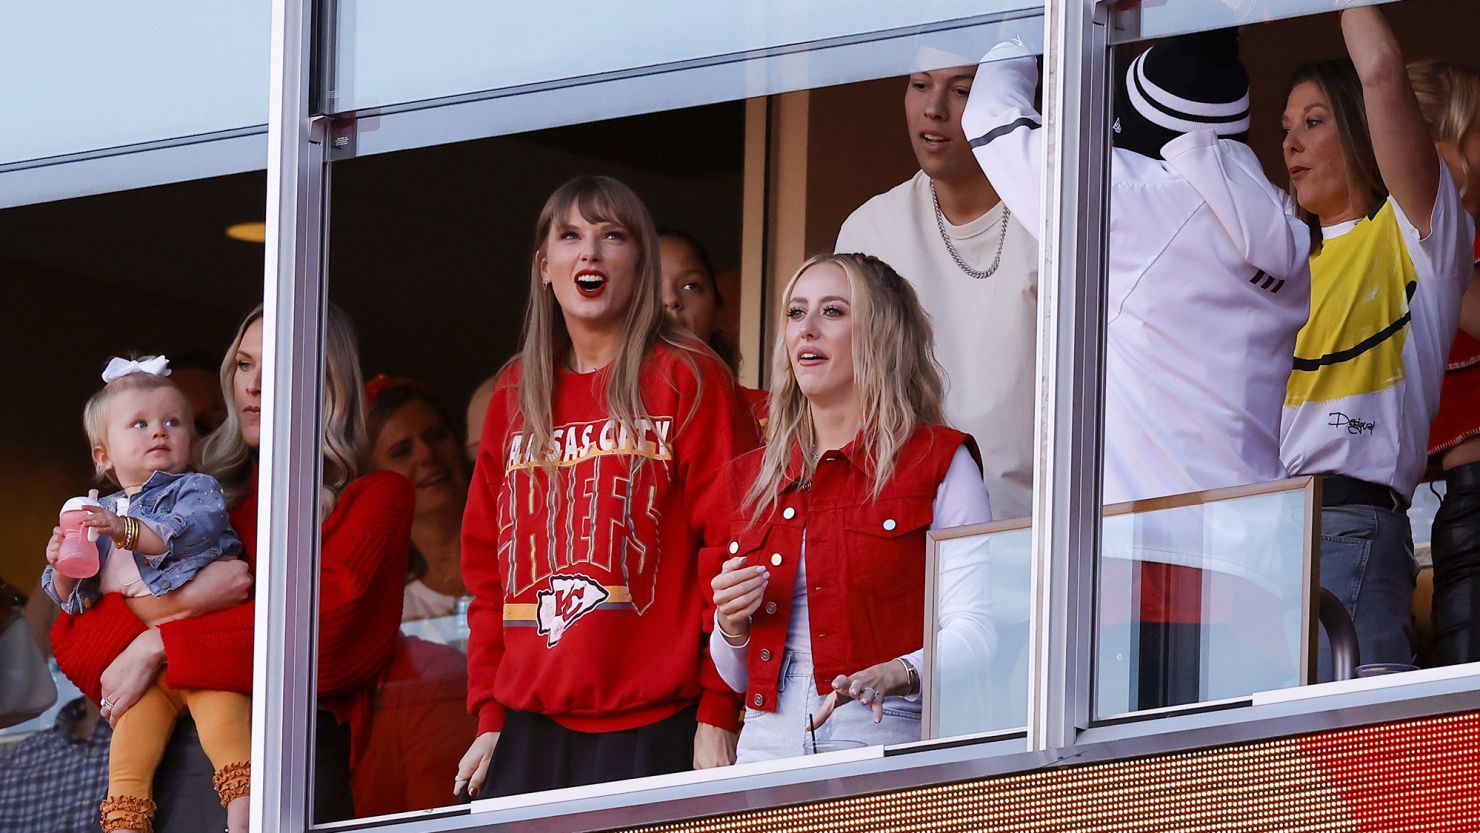 Taylor Swift has attracted a new audience to the sport after attending Kansas City Chiefs games this season.